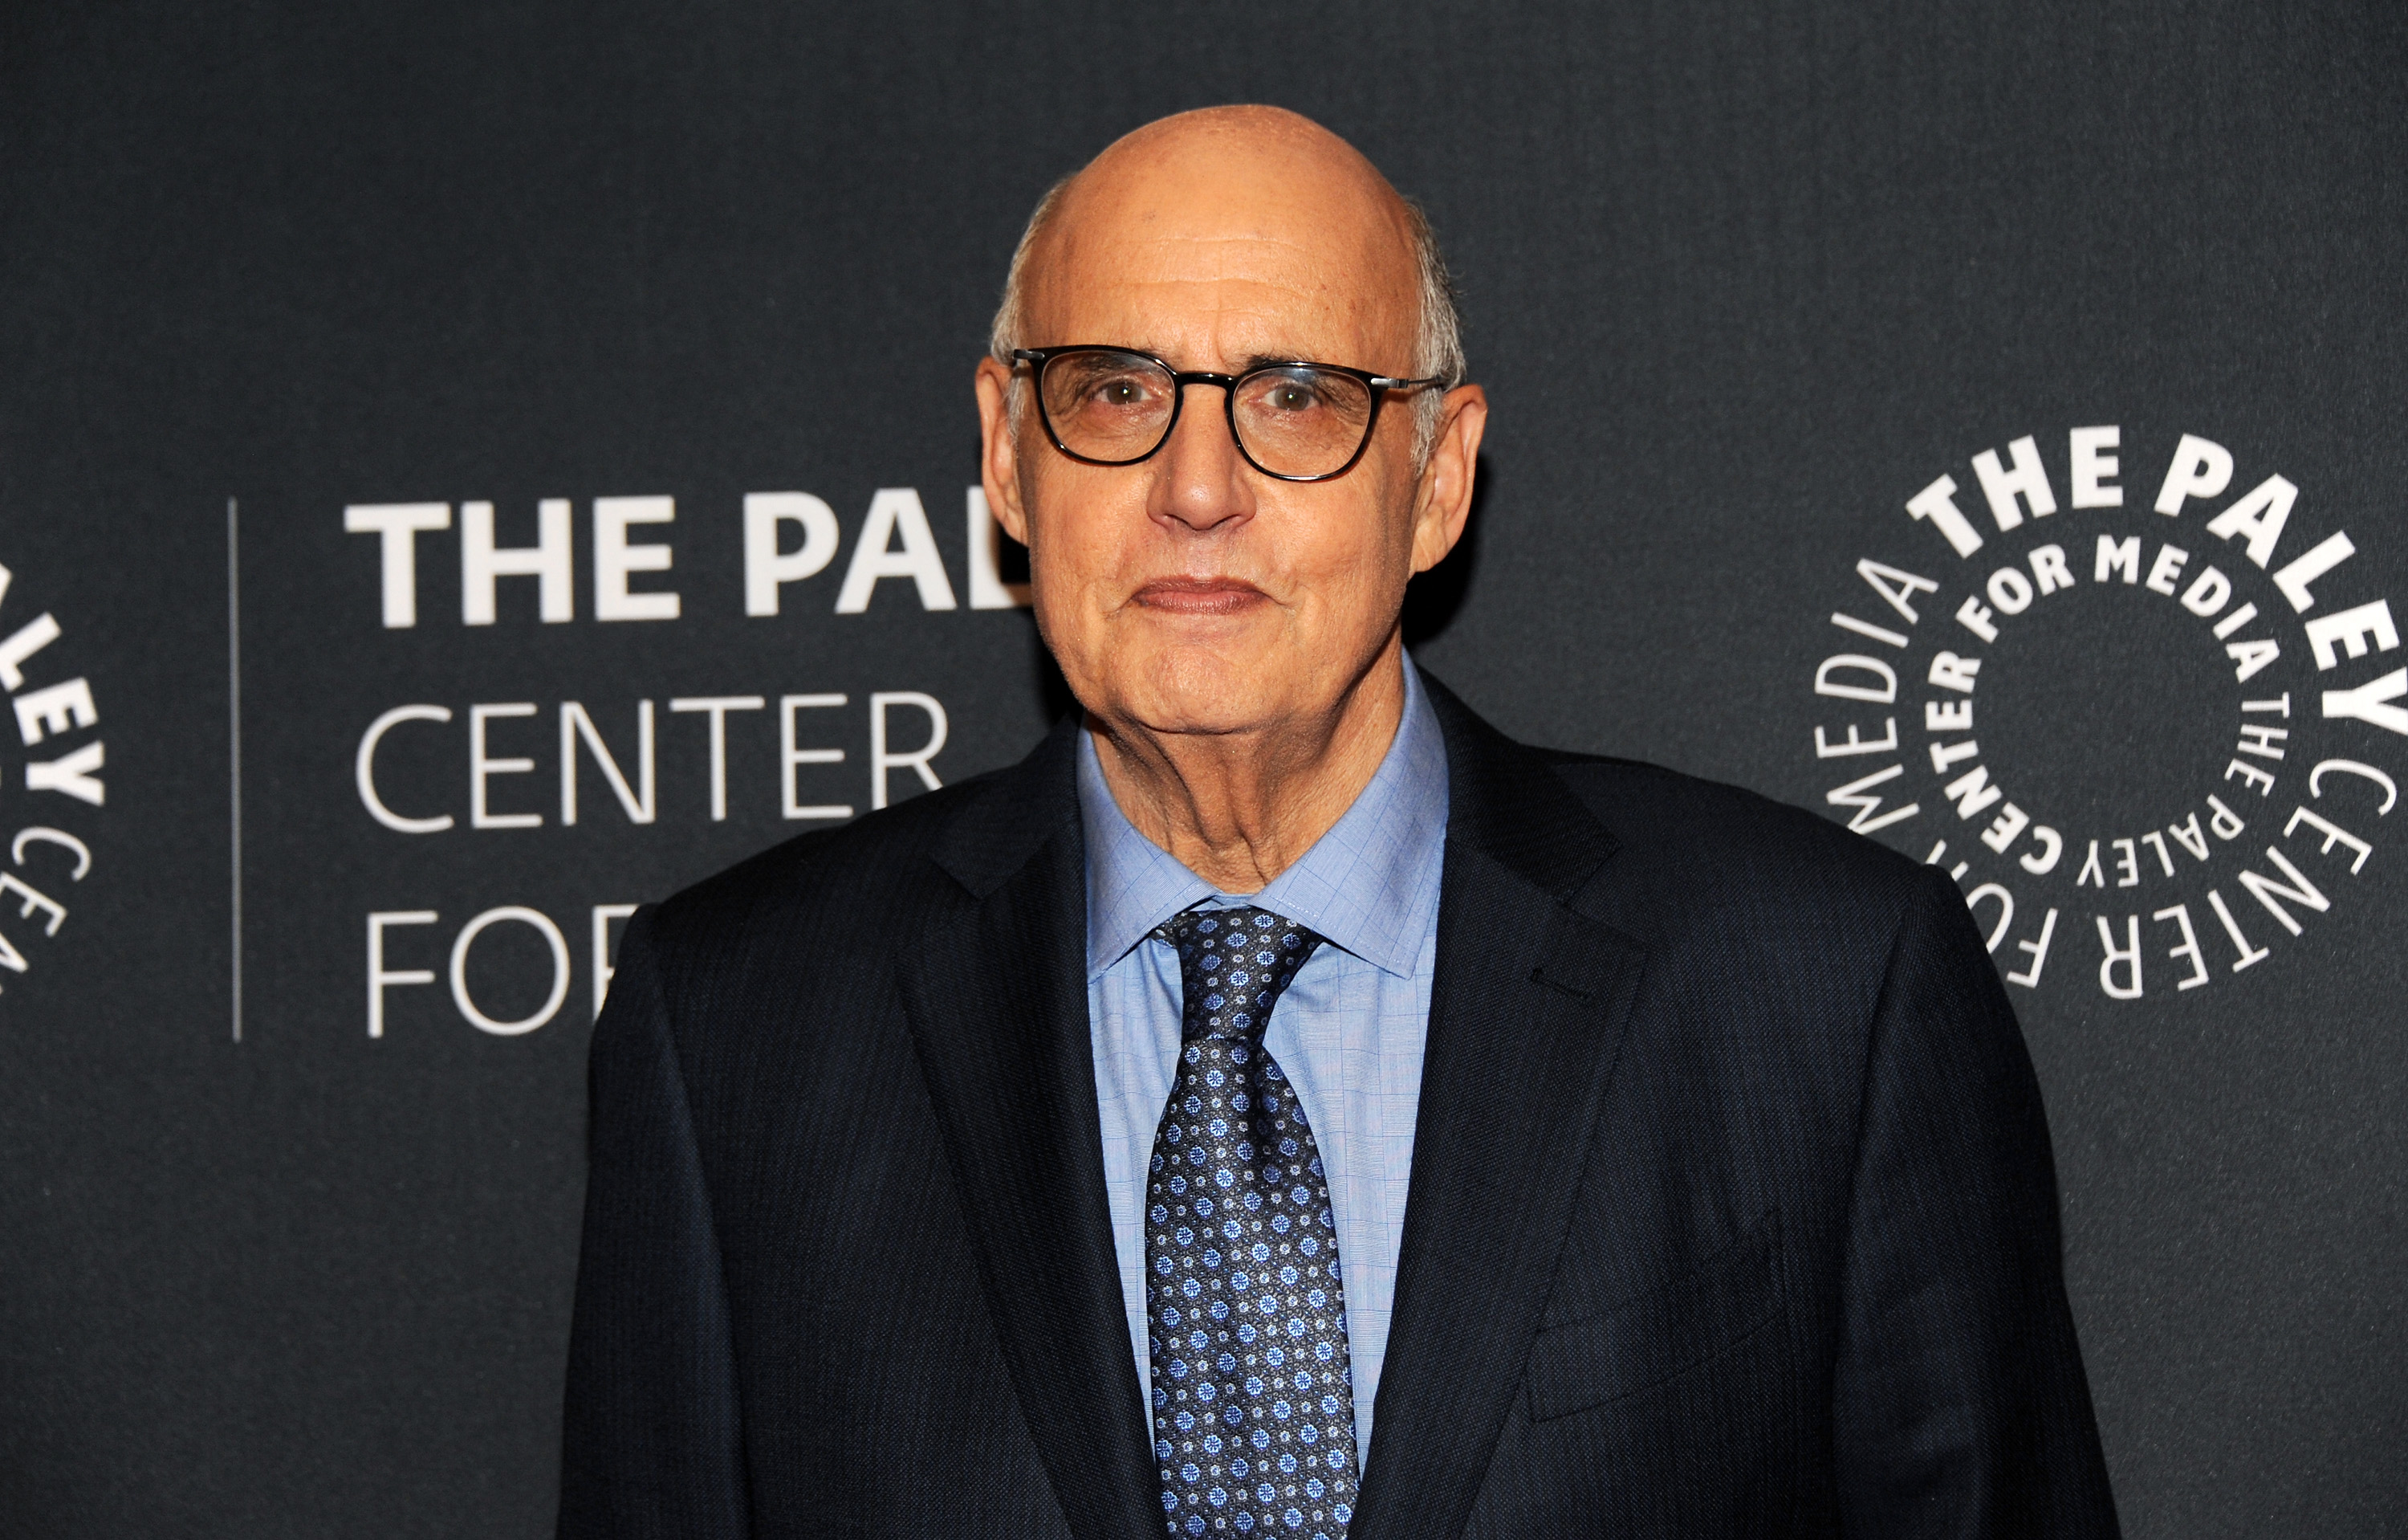 Jeffrey Tambor at The Paley Center for Media in New York on Sept. 13, 2017. (Desiree Navarro—Getty Images)